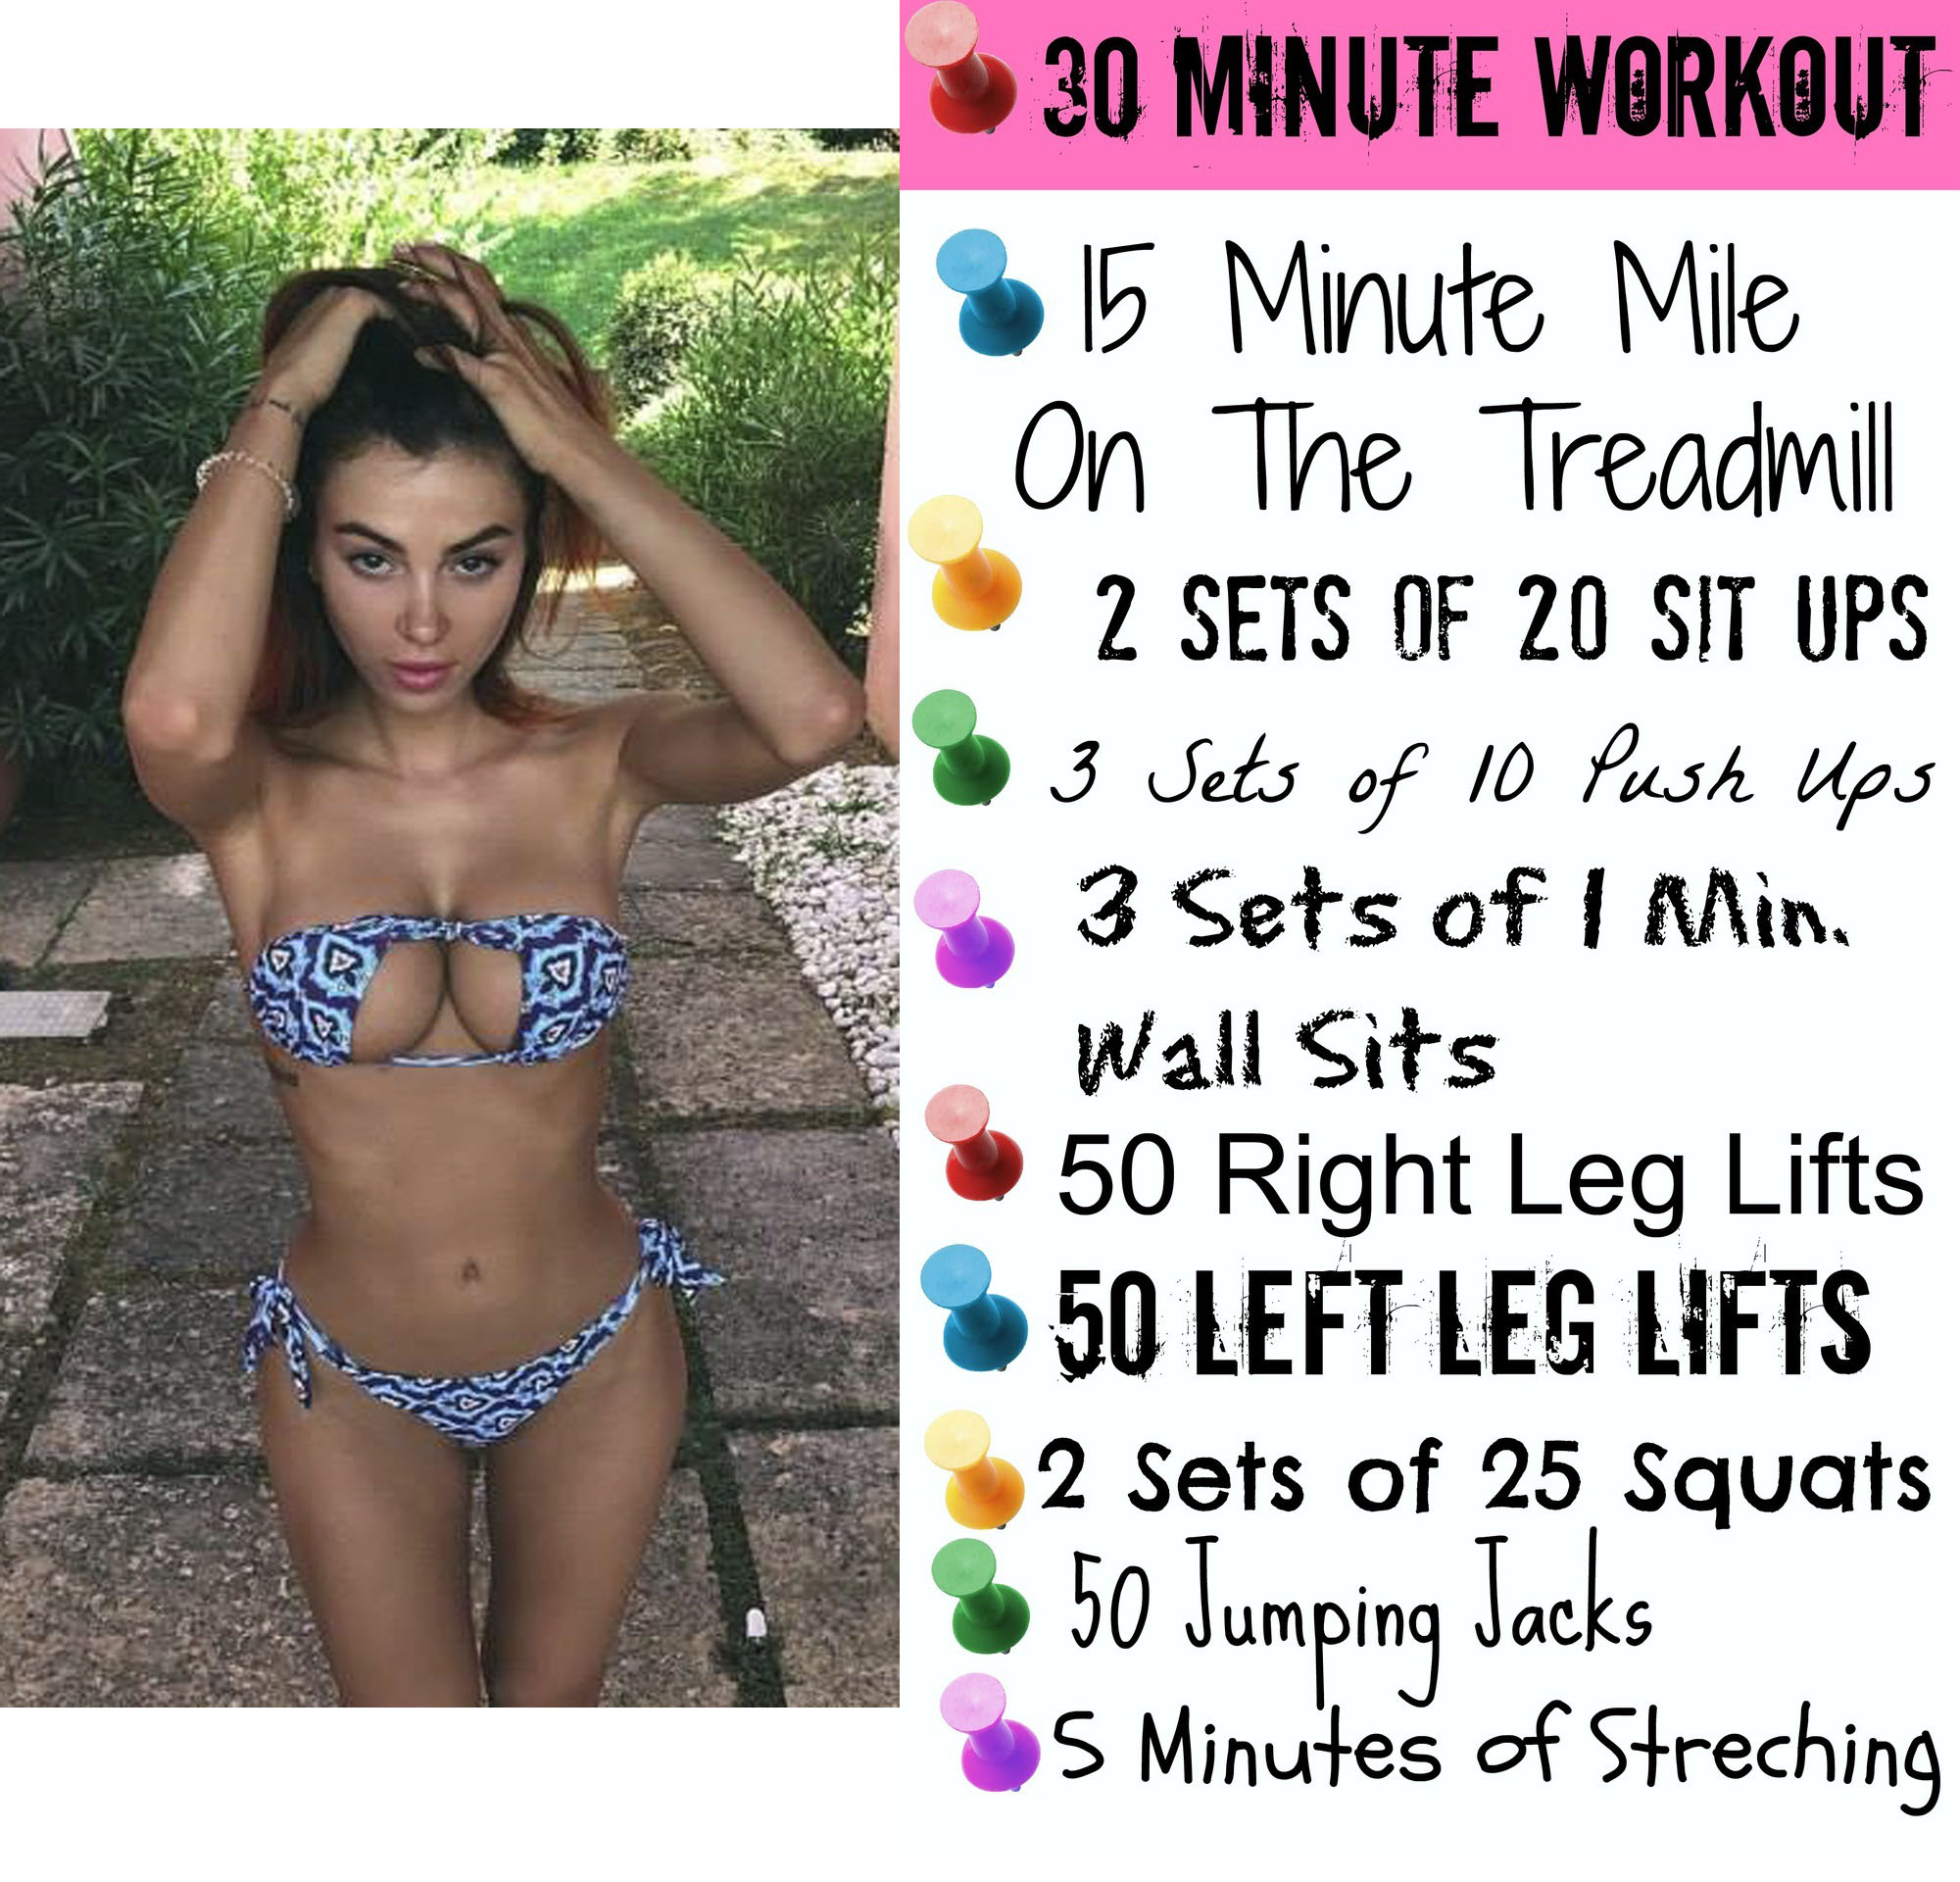 30 minute workout